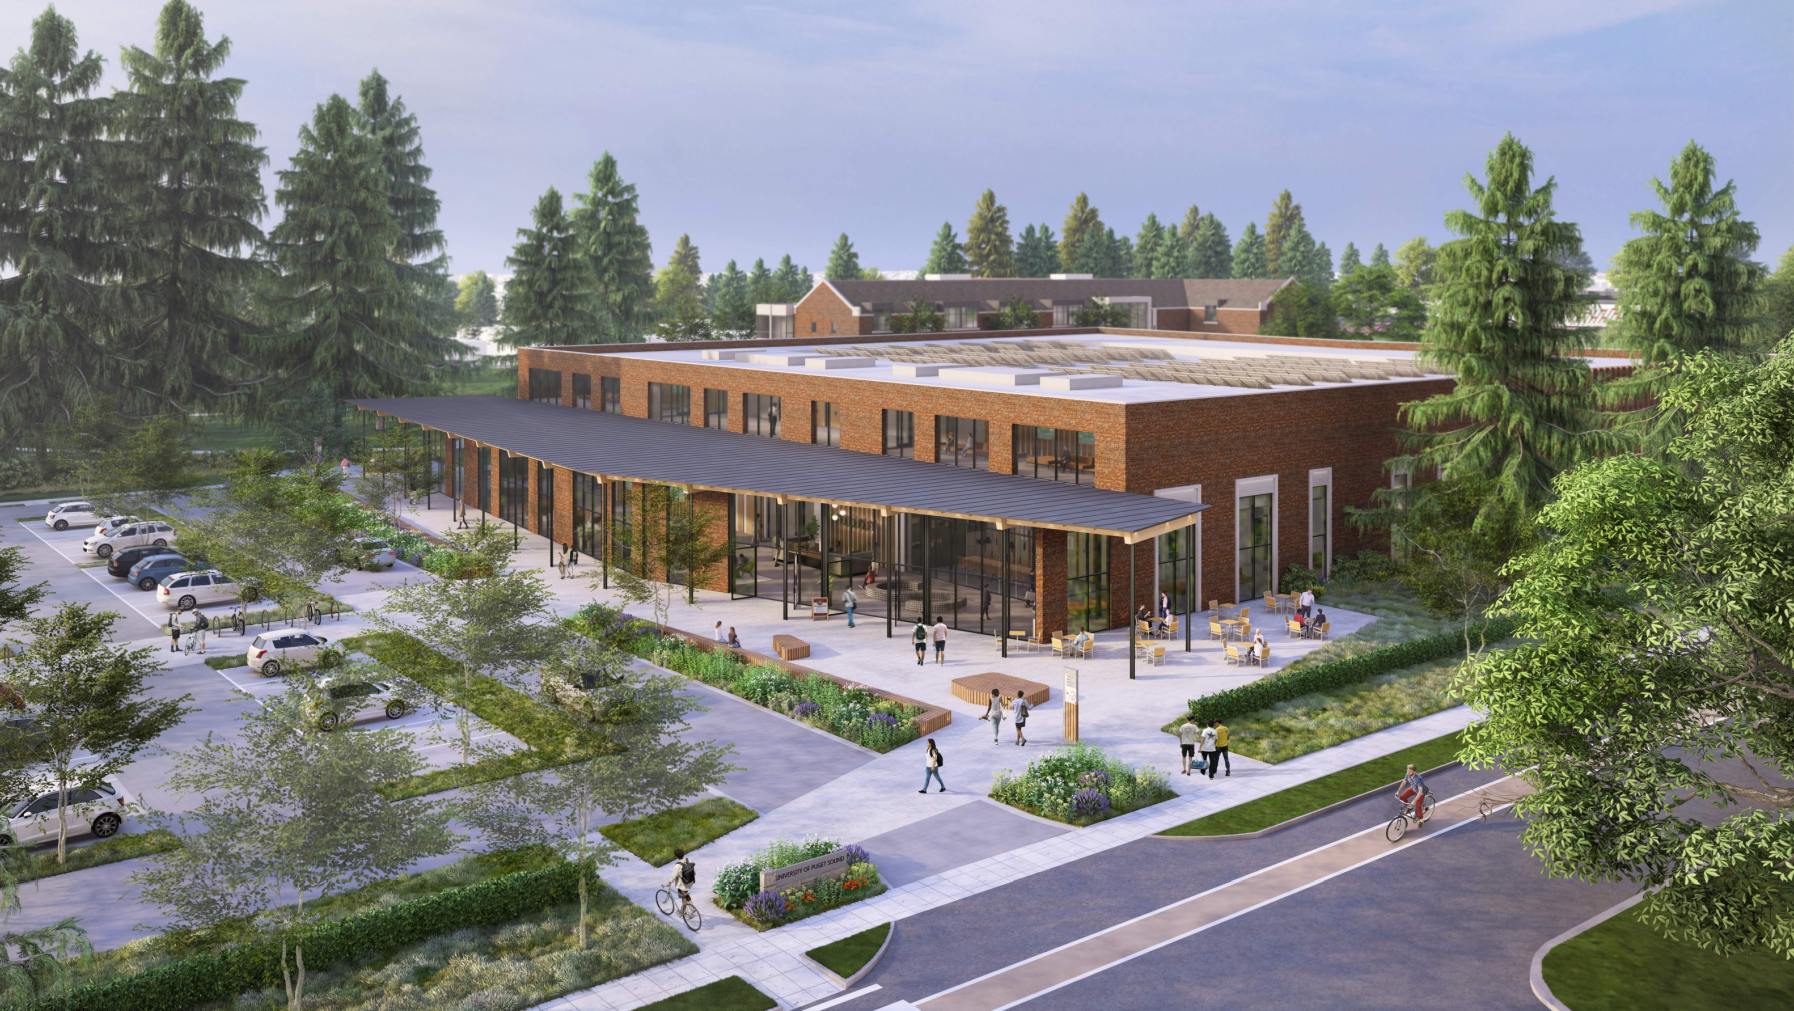 Rendering of the Conference Center from the 2023-43 Campus Development Plan